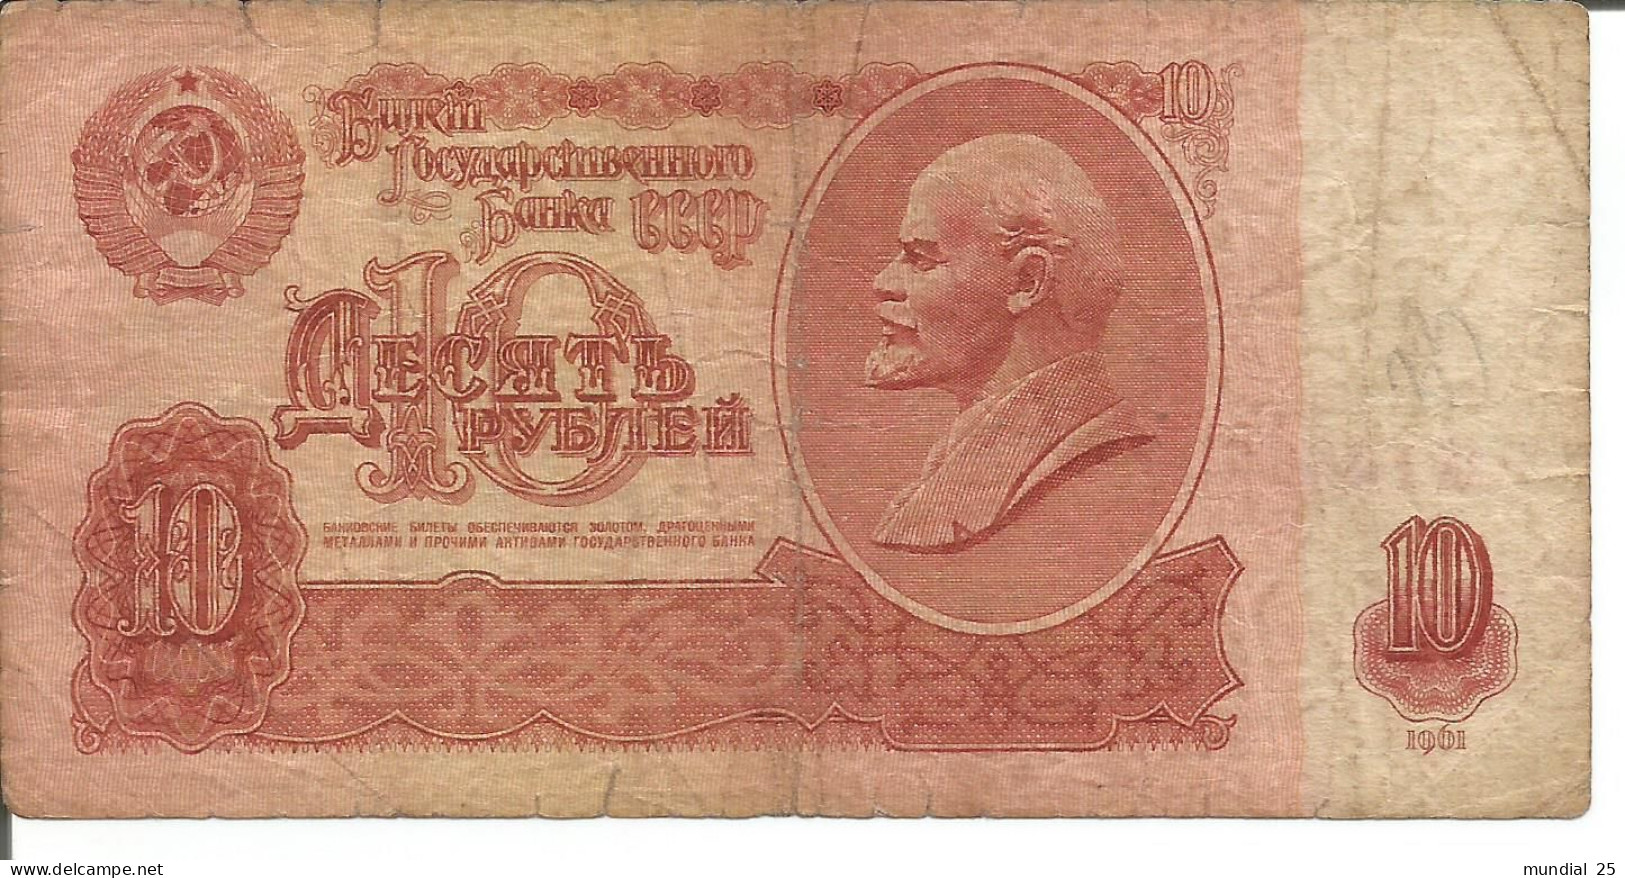 3 RUSSIA NOTES 10 RUBLES 1961 - Russland